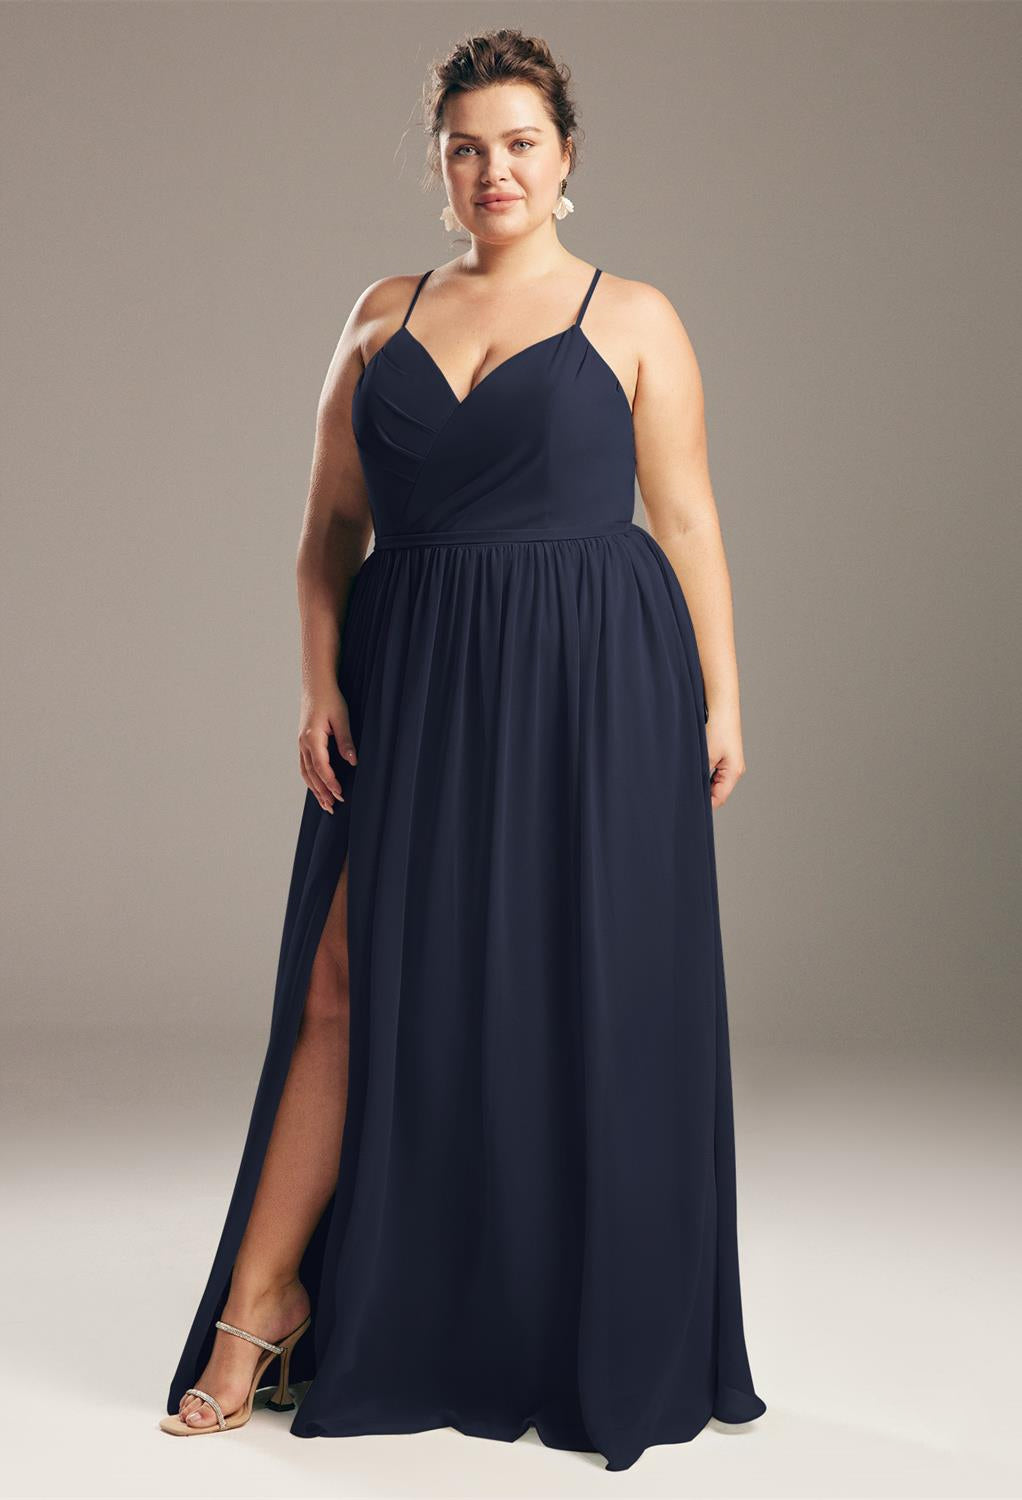 Woman in an elegant Wilfreda - Chiffon Bridesmaid Dress - Off The Rack gown in navy blue with a slit, standing confidently in one of London's Bergamot Bridal shops, looking directly at the camera.